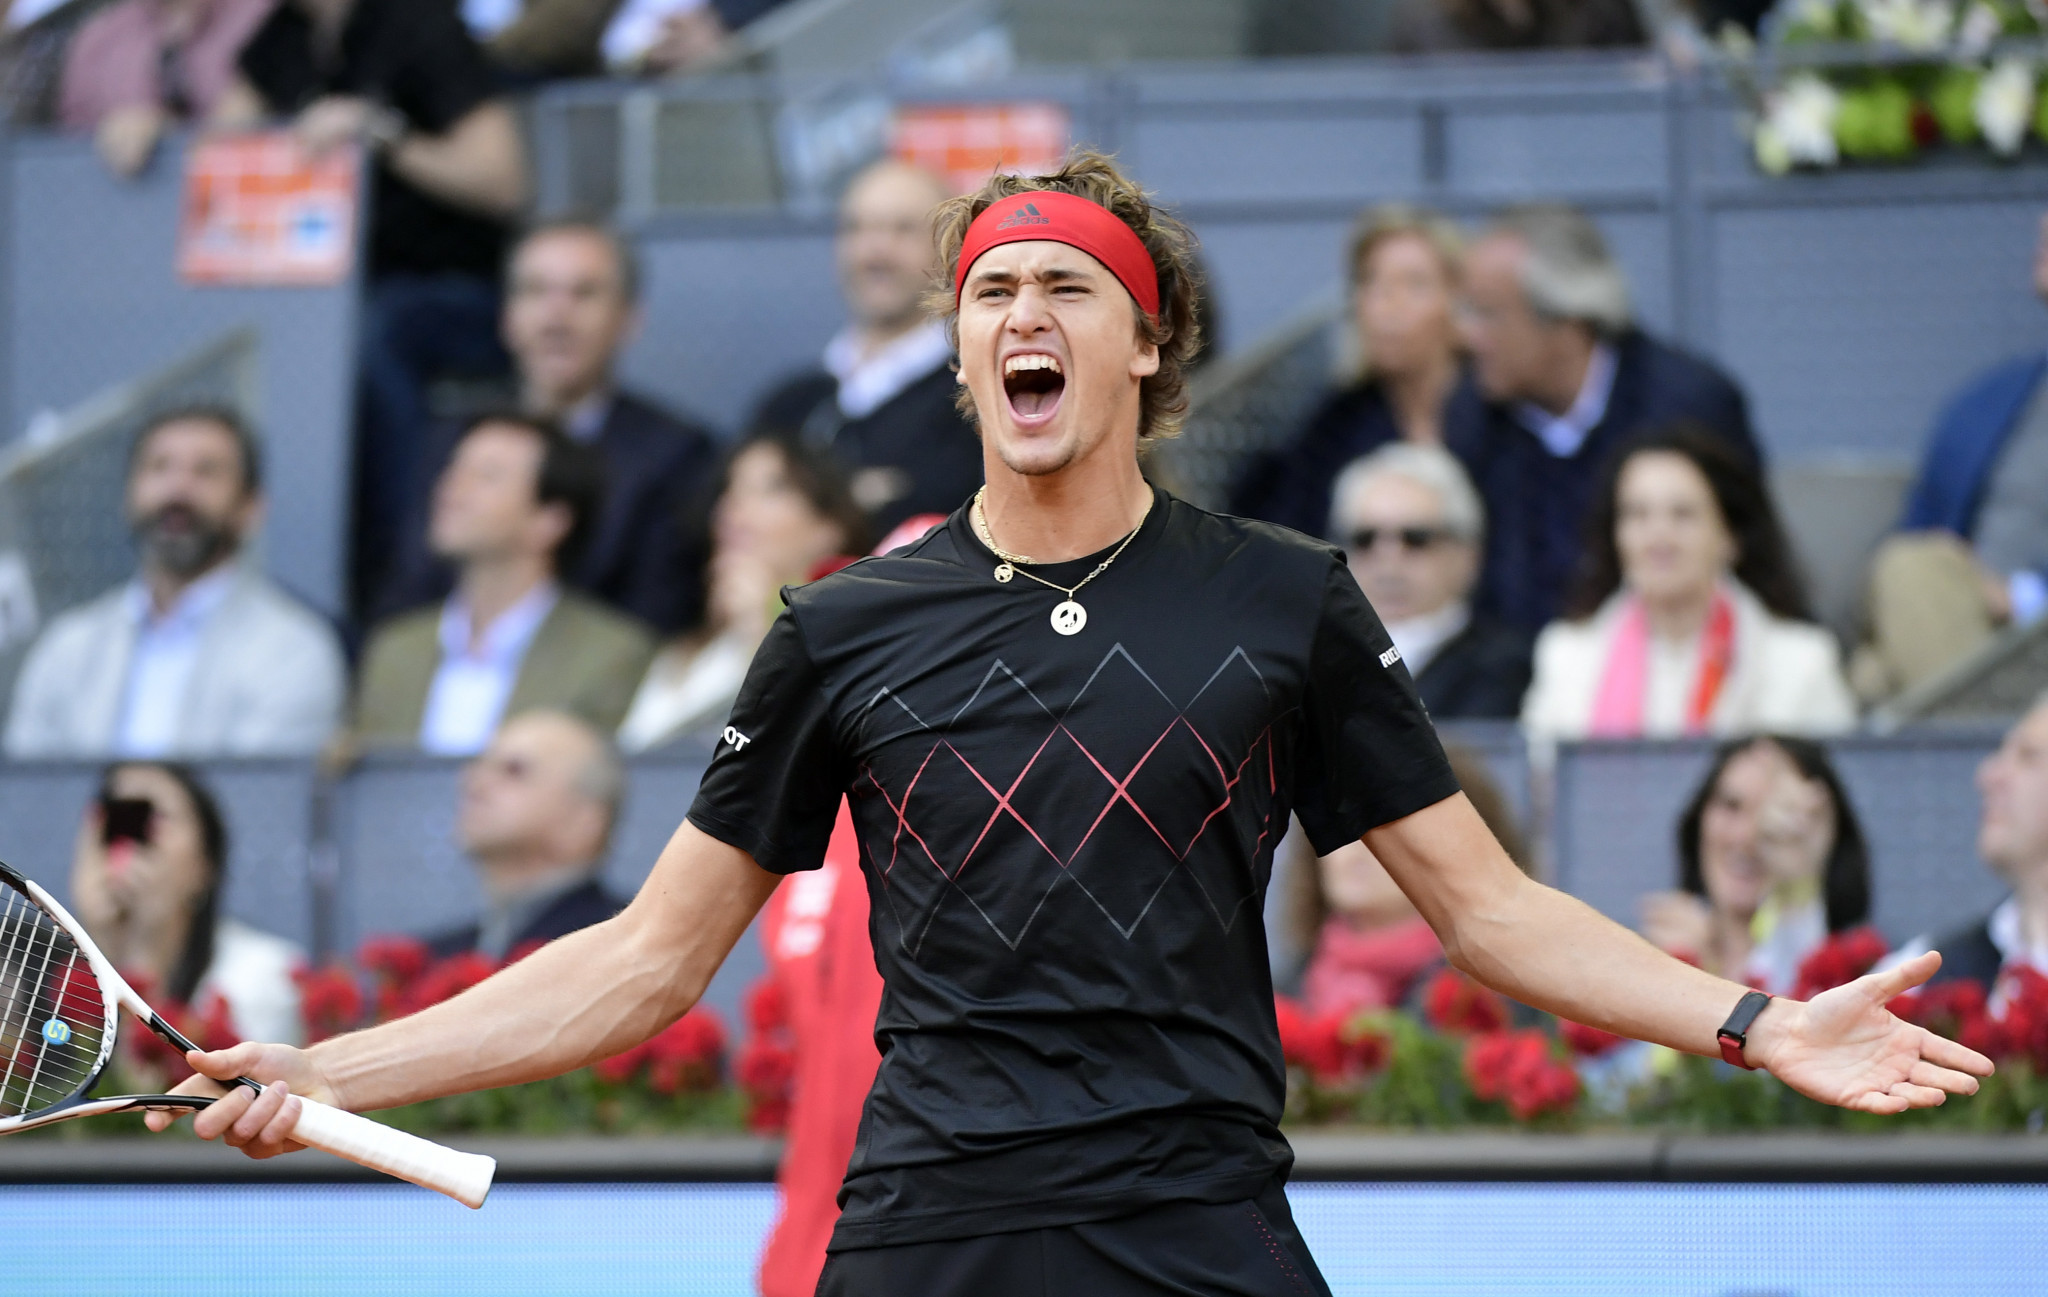 Germany’s Alexander Zverev has claimed his third Masters title after beating Austria’s Dominic Thiem in the Mutua Madrid Open final ©Getty Images